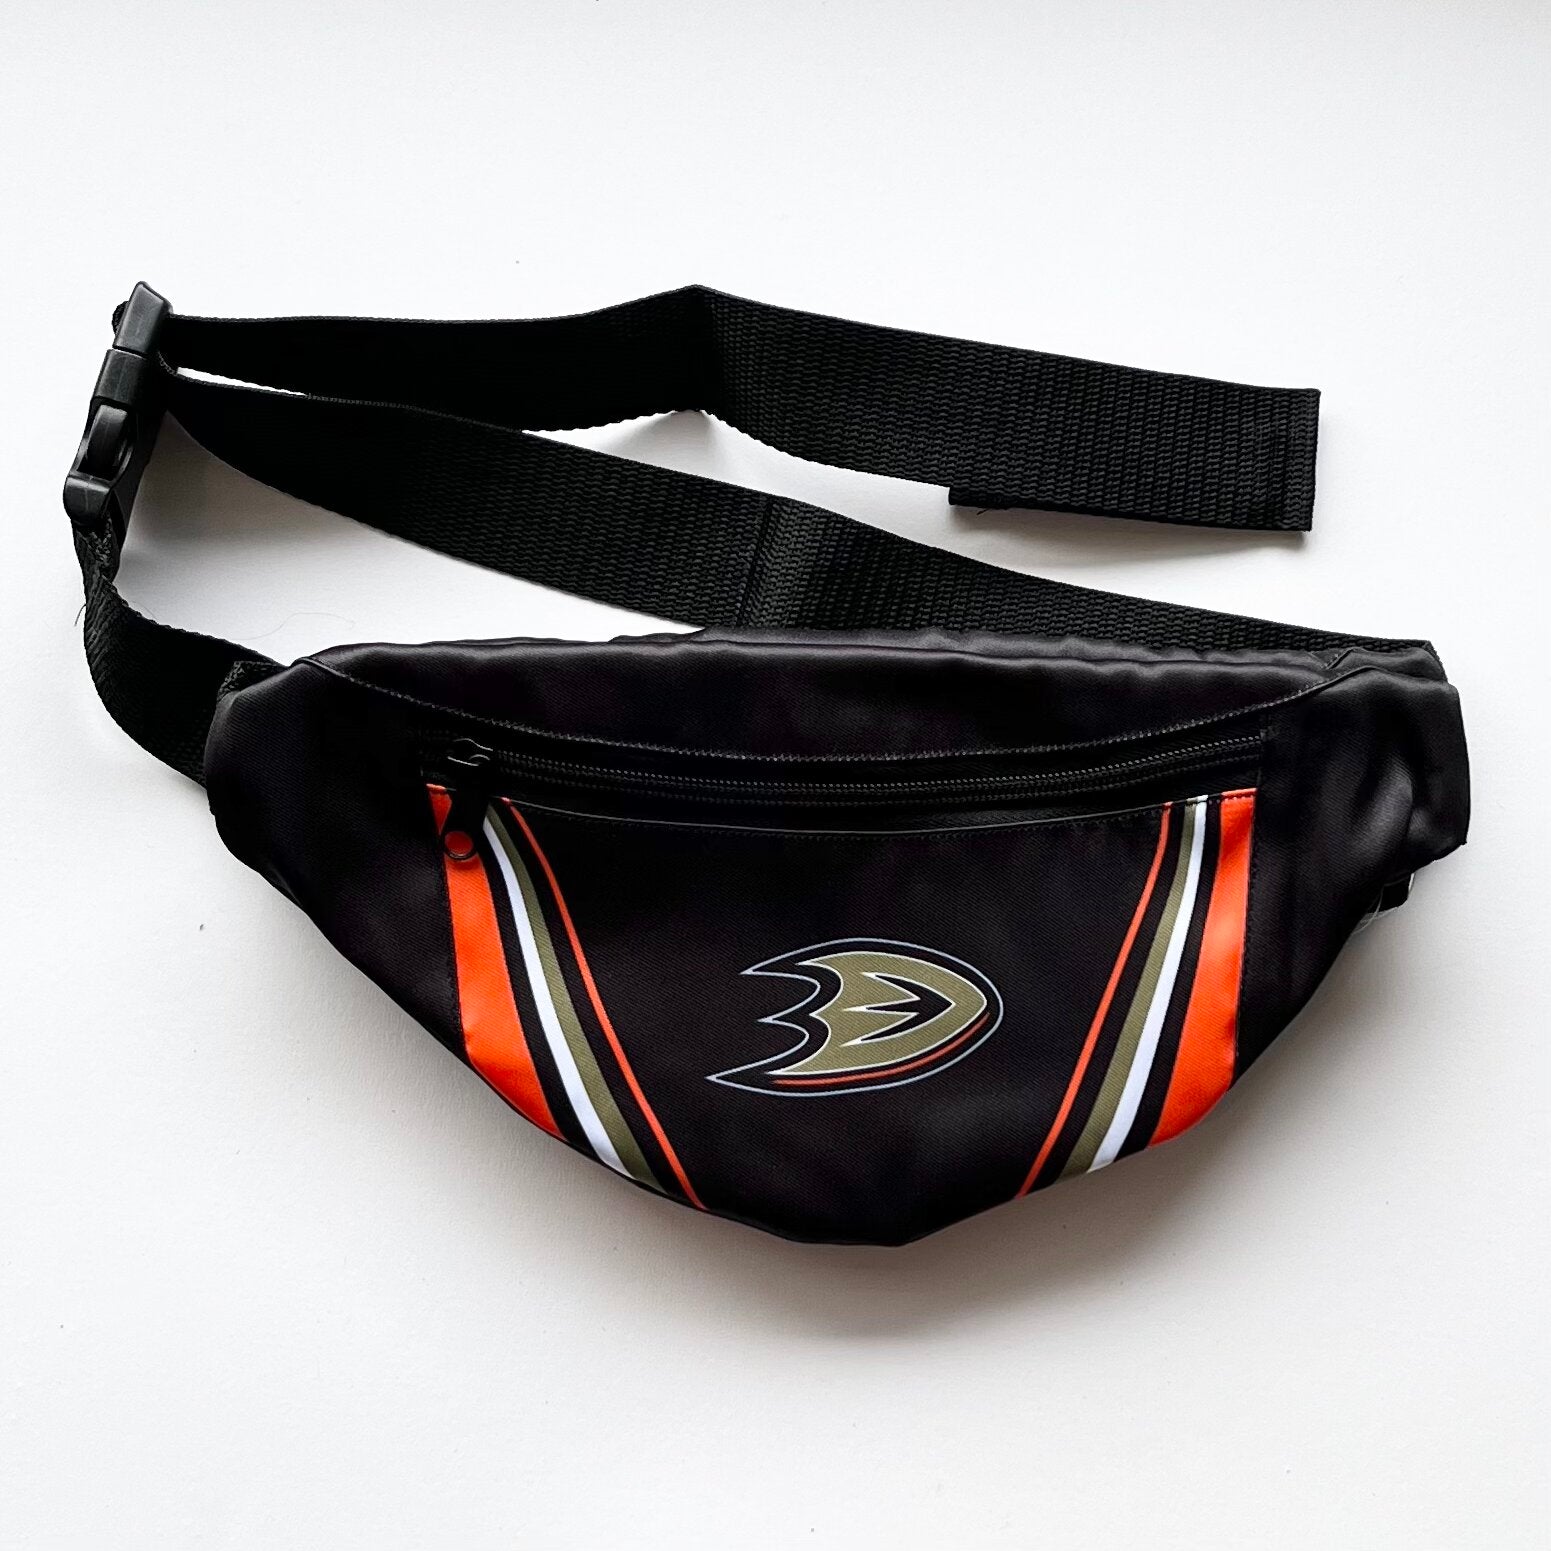 Officially Licensed NHL Fanny Pack - Anaheim Ducks